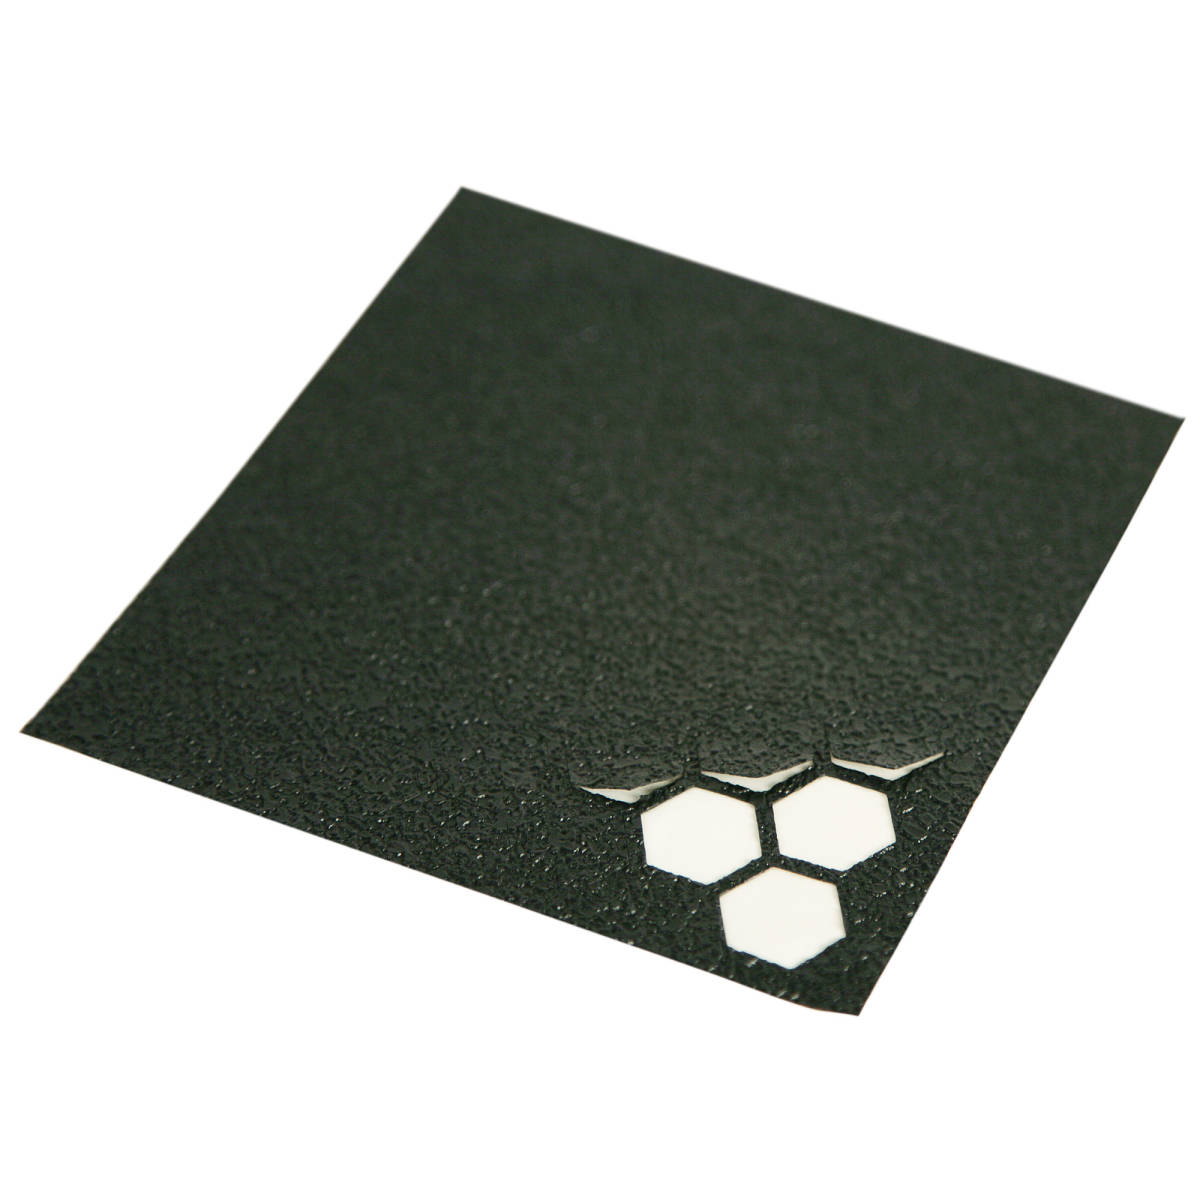 Hexmag HXGTBLK Grip Tape with Black Finish & Hexagon Shape for Magazines-img-1